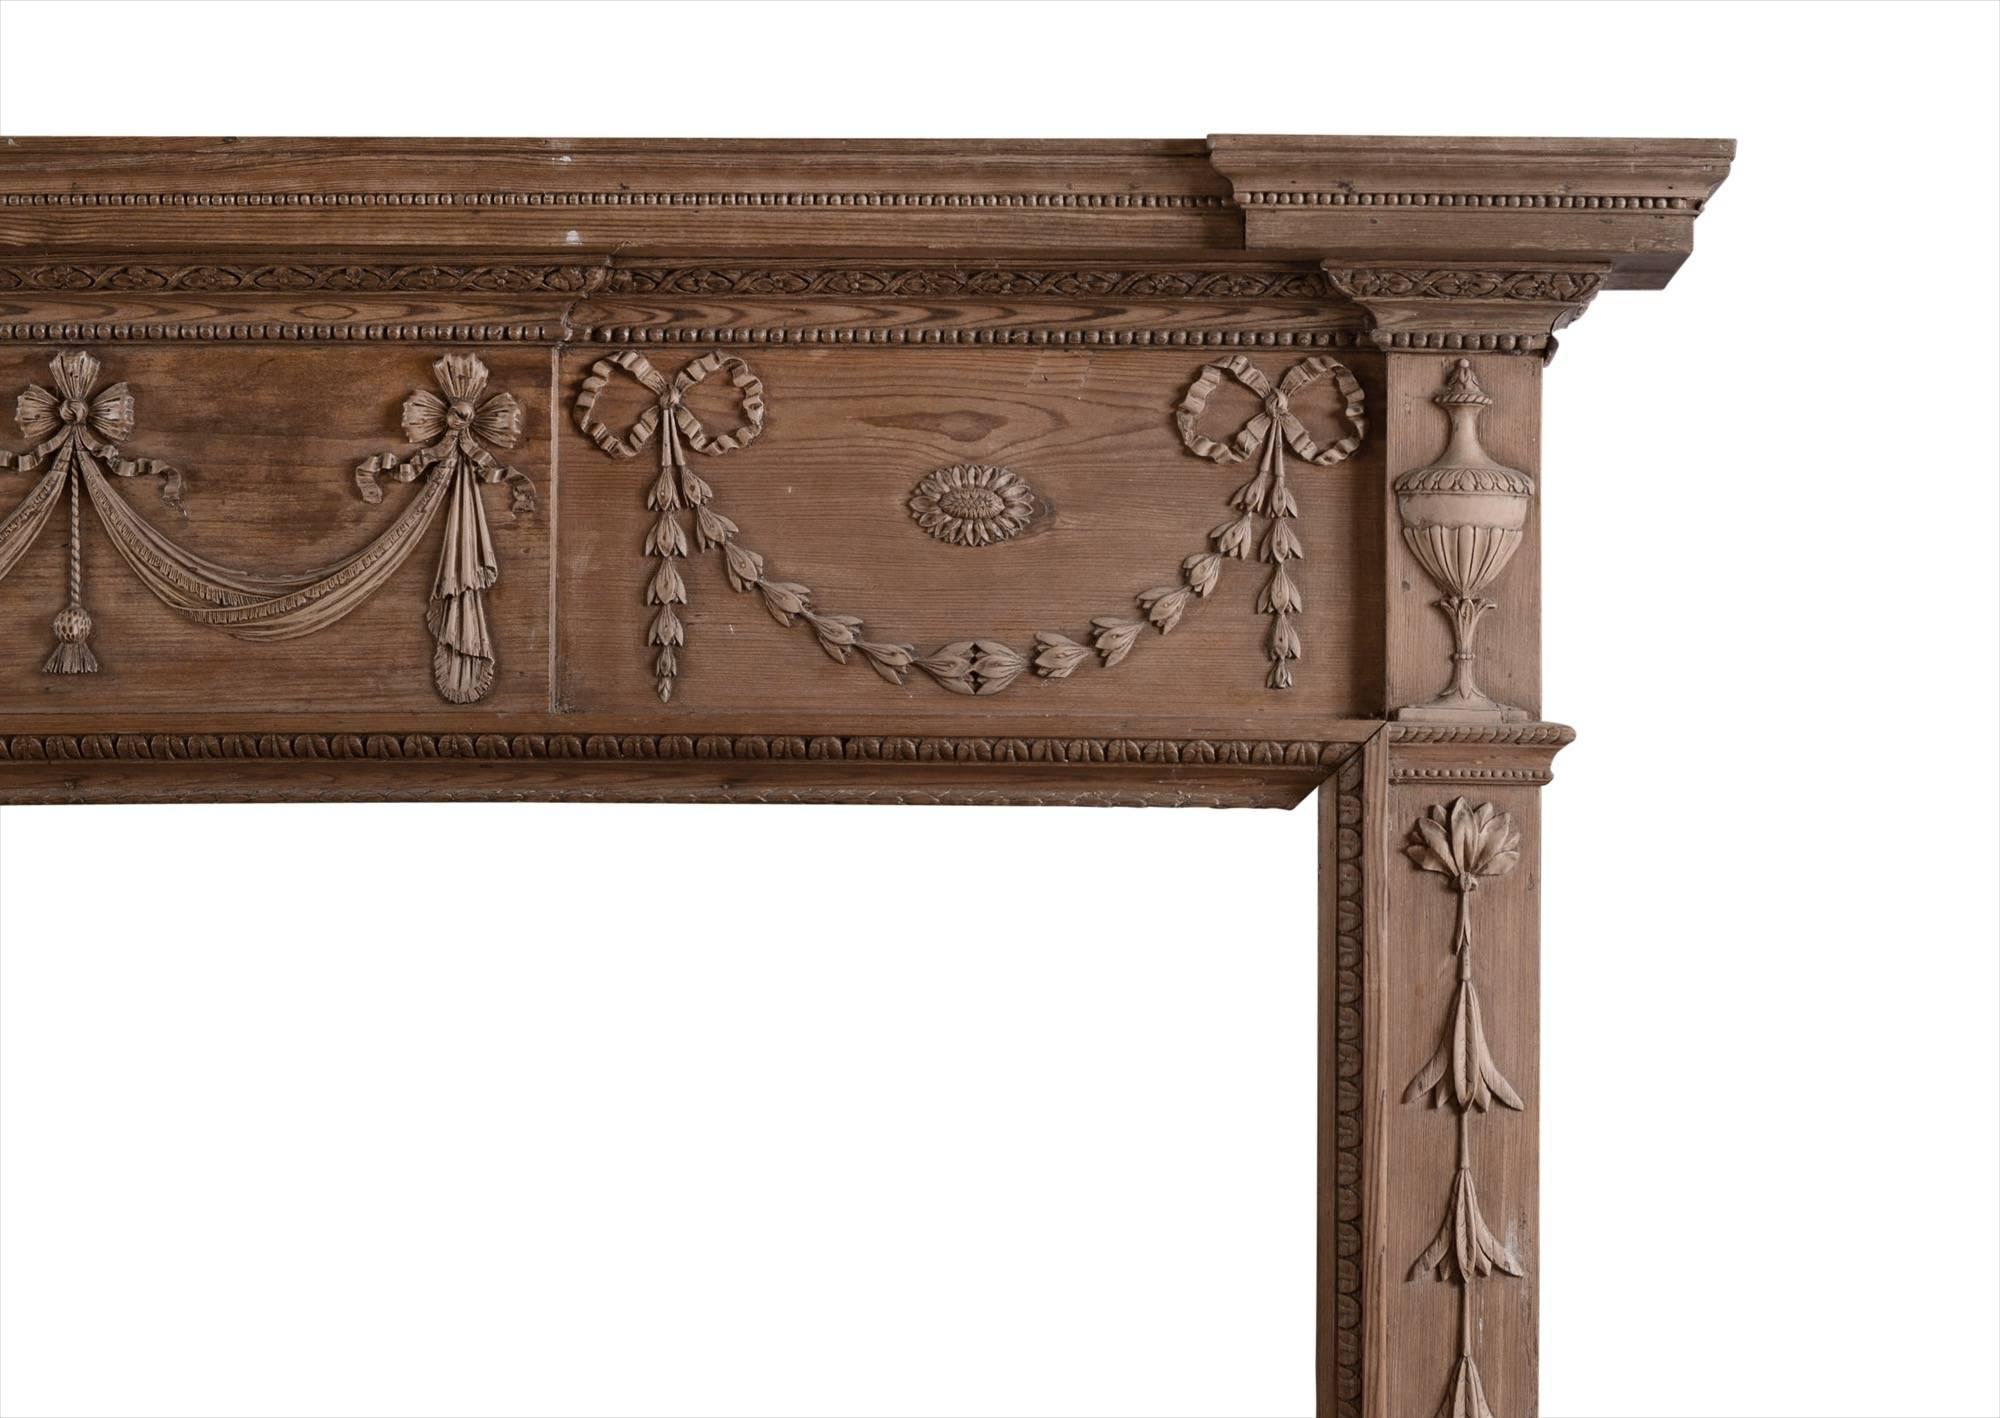 A good quality pine fireplace in the Georgian style. The legs with carved bell flowers, surmounted by classical urn. The frieze with swags, drapery and tied ribbons, surmounted by moulded shelf with decorative beading, English, 19th century.

Shelf